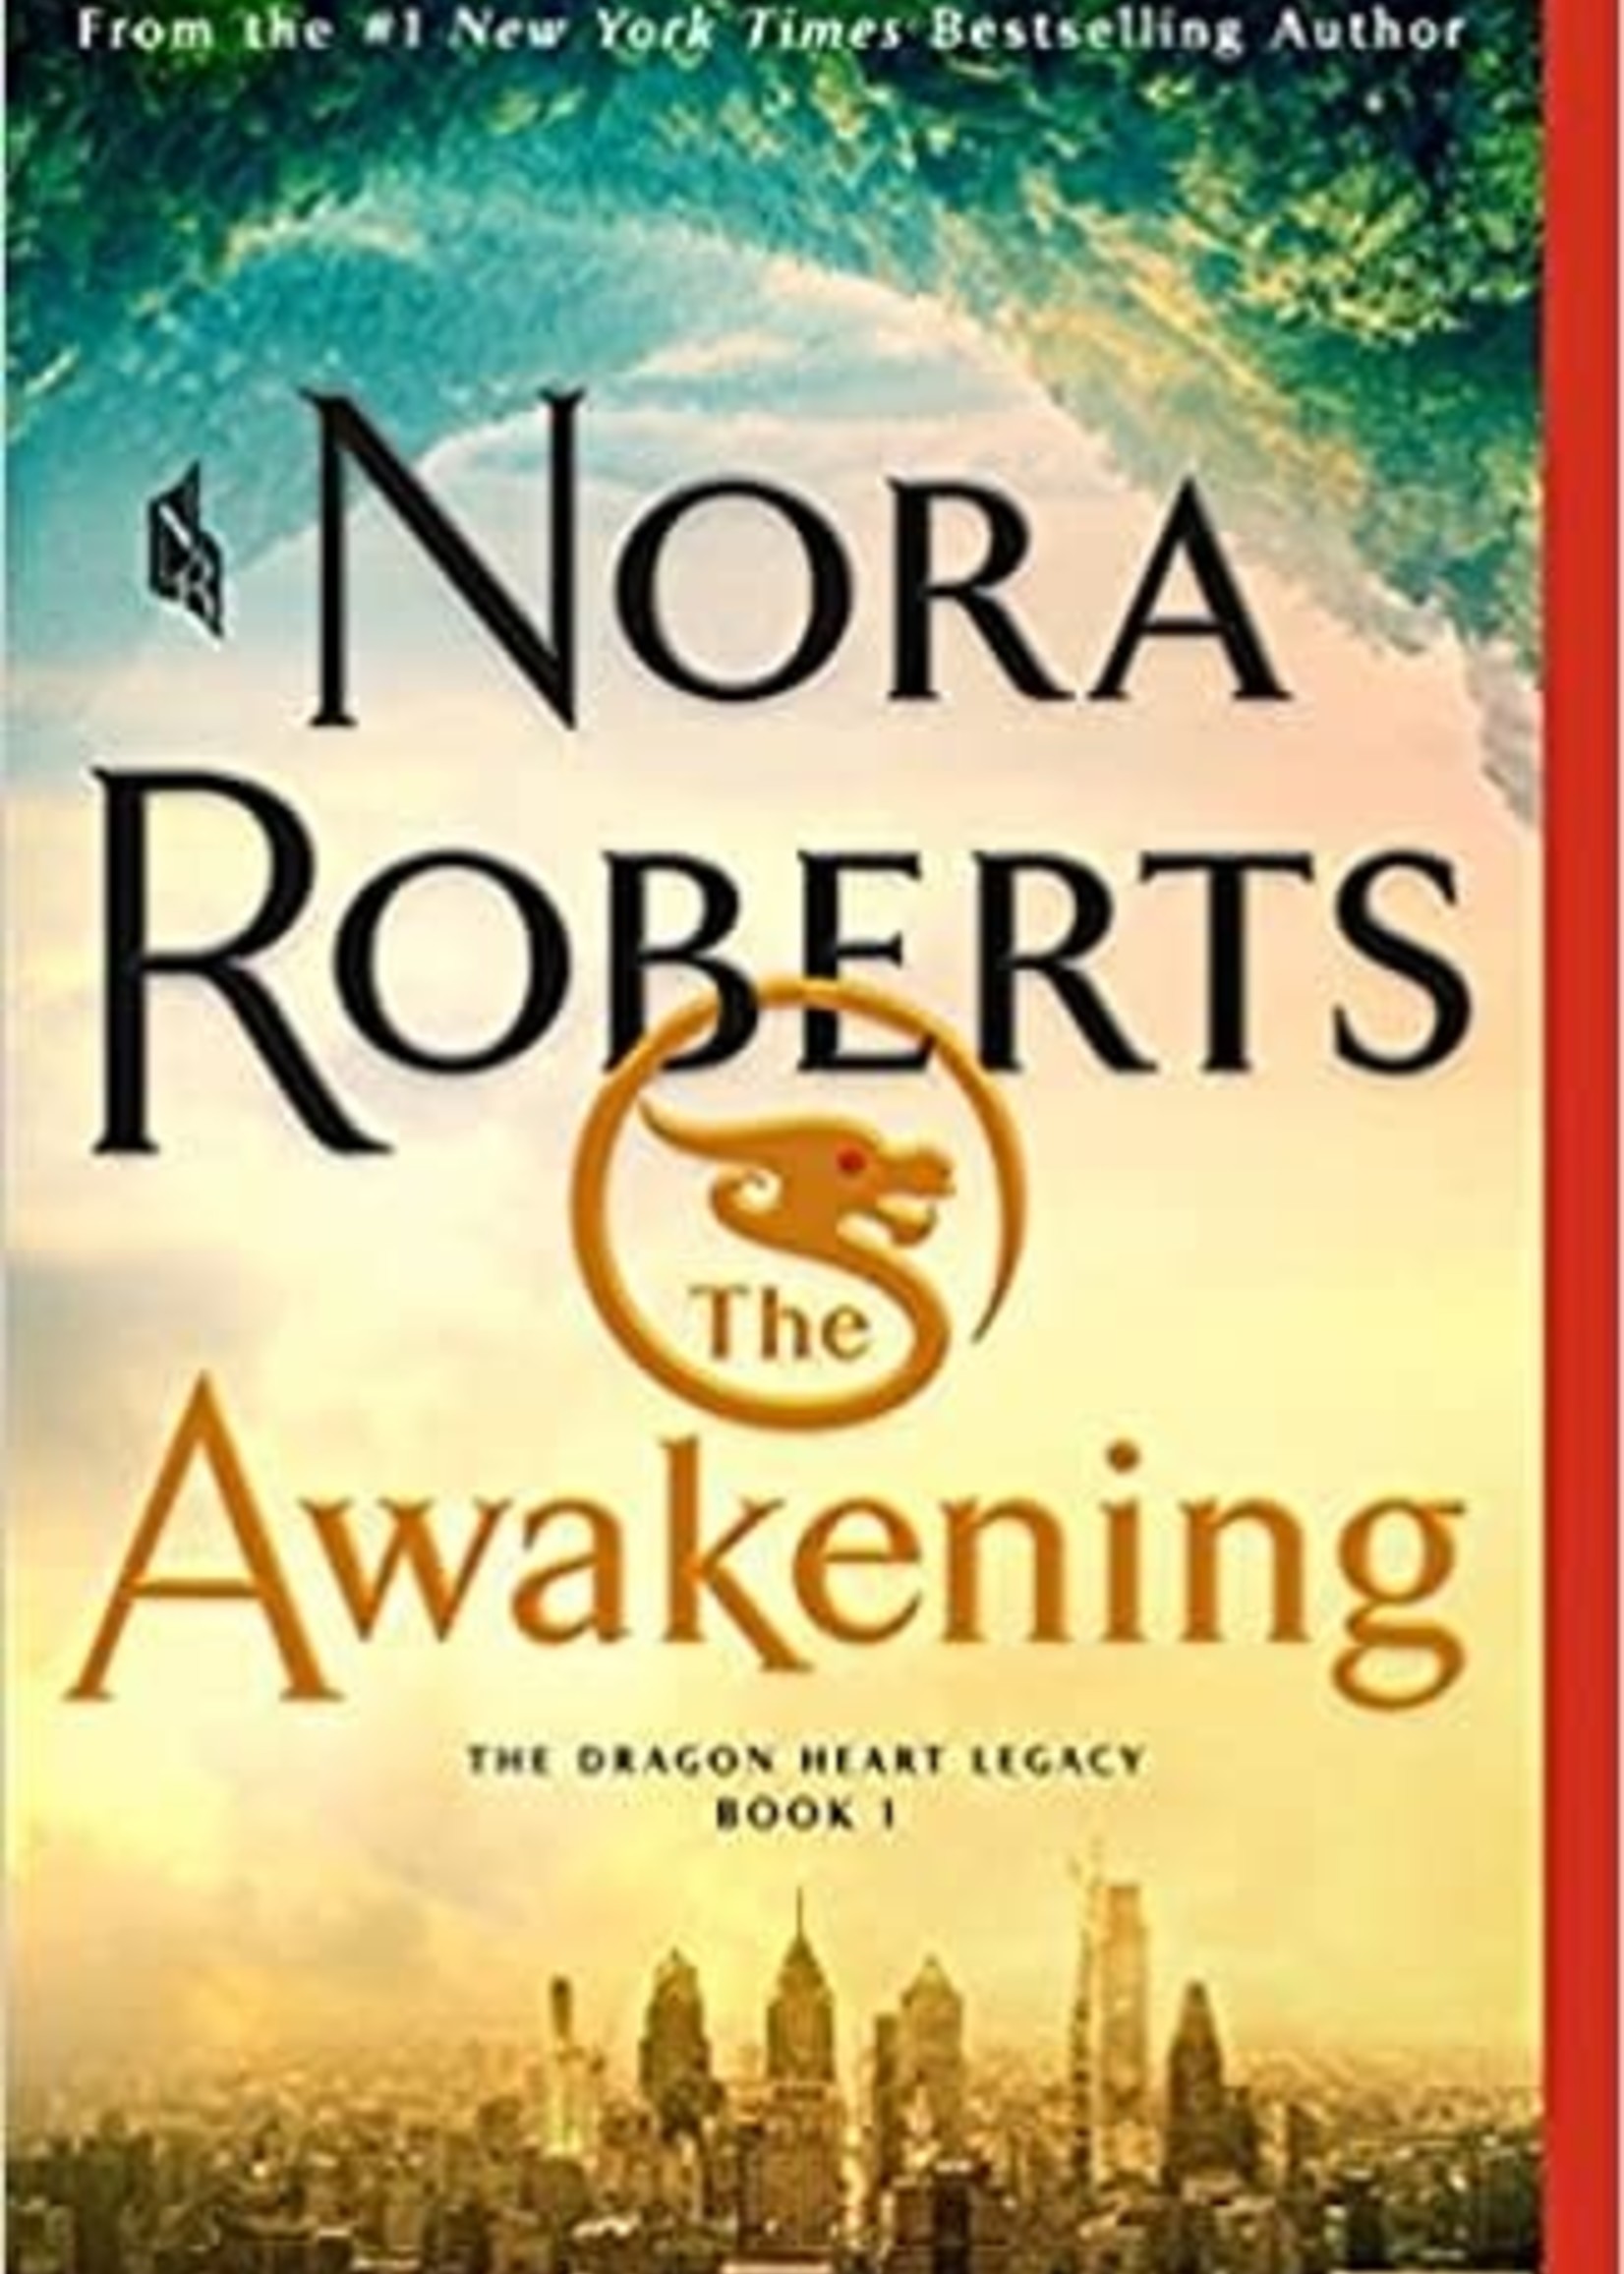 The Awakening (The Dragon Heart Legacy #1) by Nora Roberts